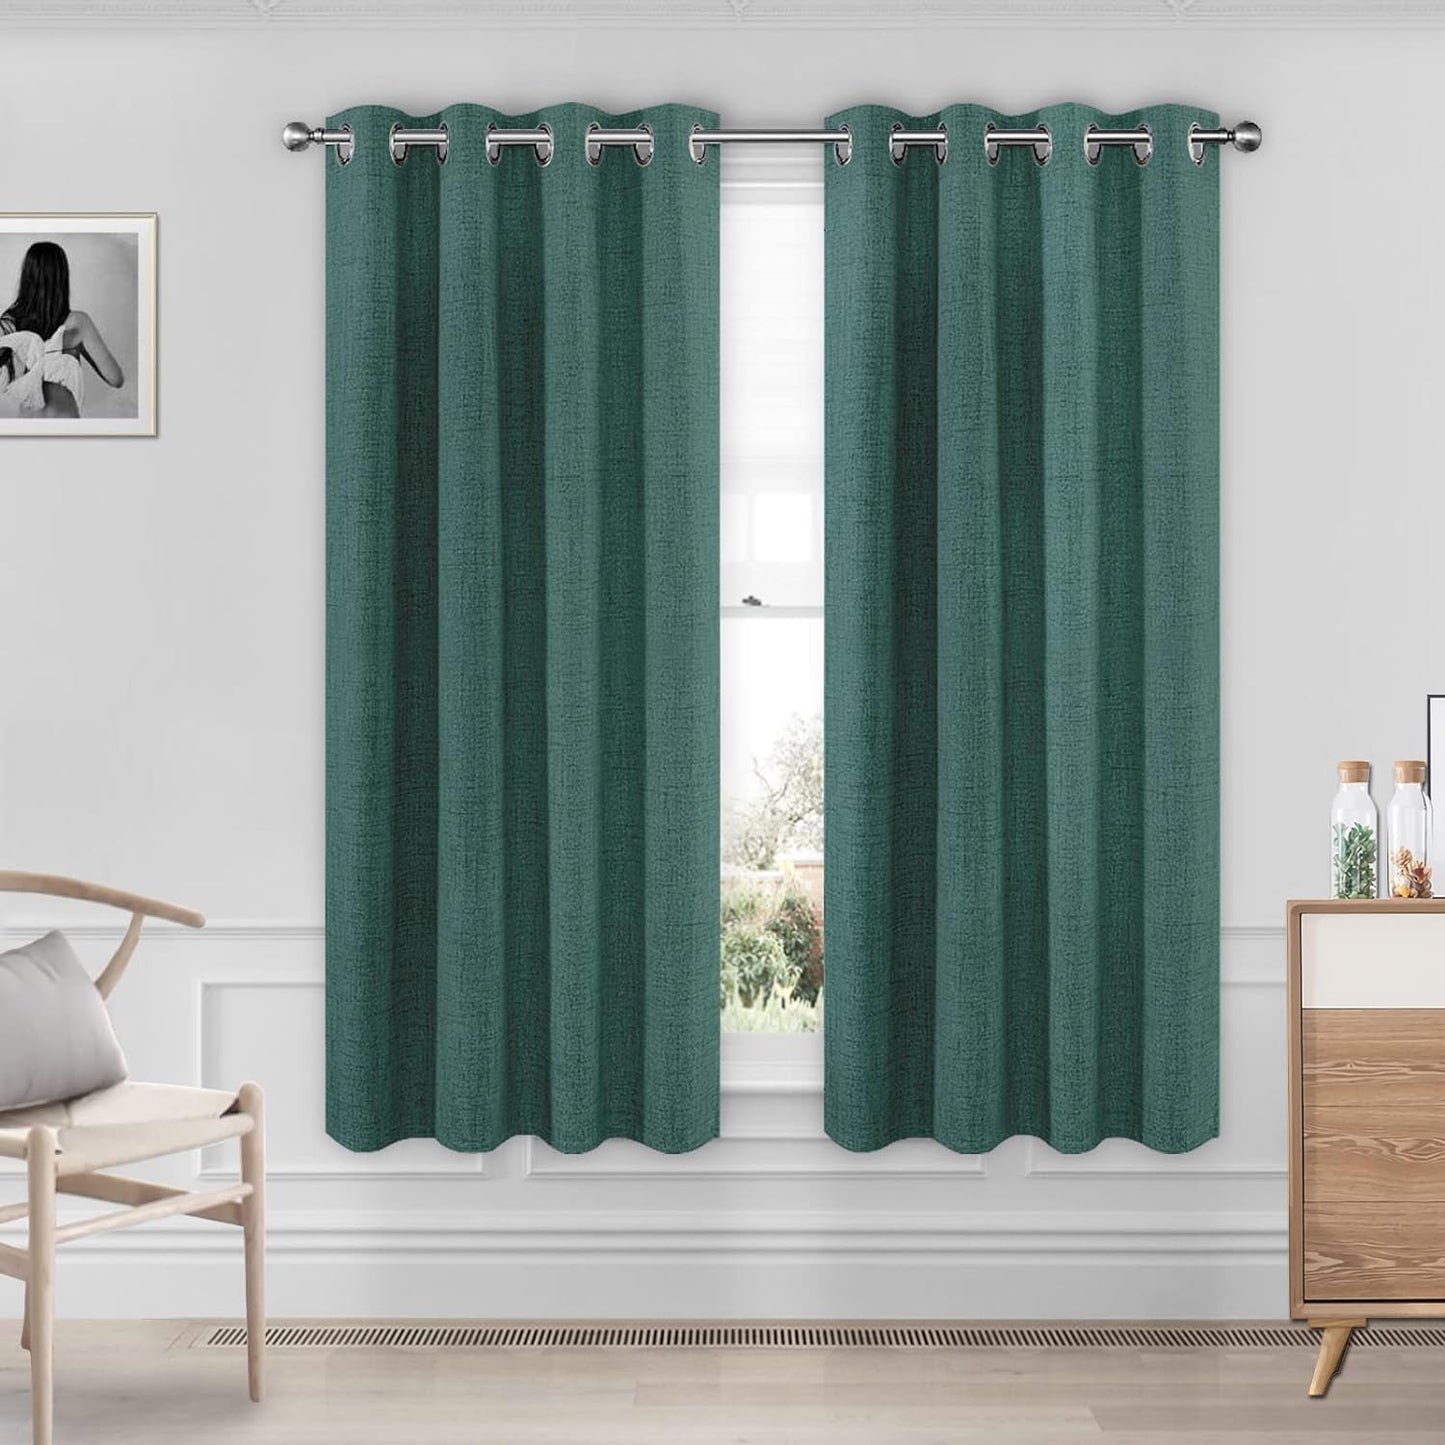 CUCRAF Full Blackout Window Curtains 84 Inches Long,Faux Linen Look Thermal Insulated Grommet Drapes Panels for Bedroom Living Room,Set of 2(52 X 84 Inches, Light Khaki)  CUCRAF Hunter Green 52 X 63 Inches 